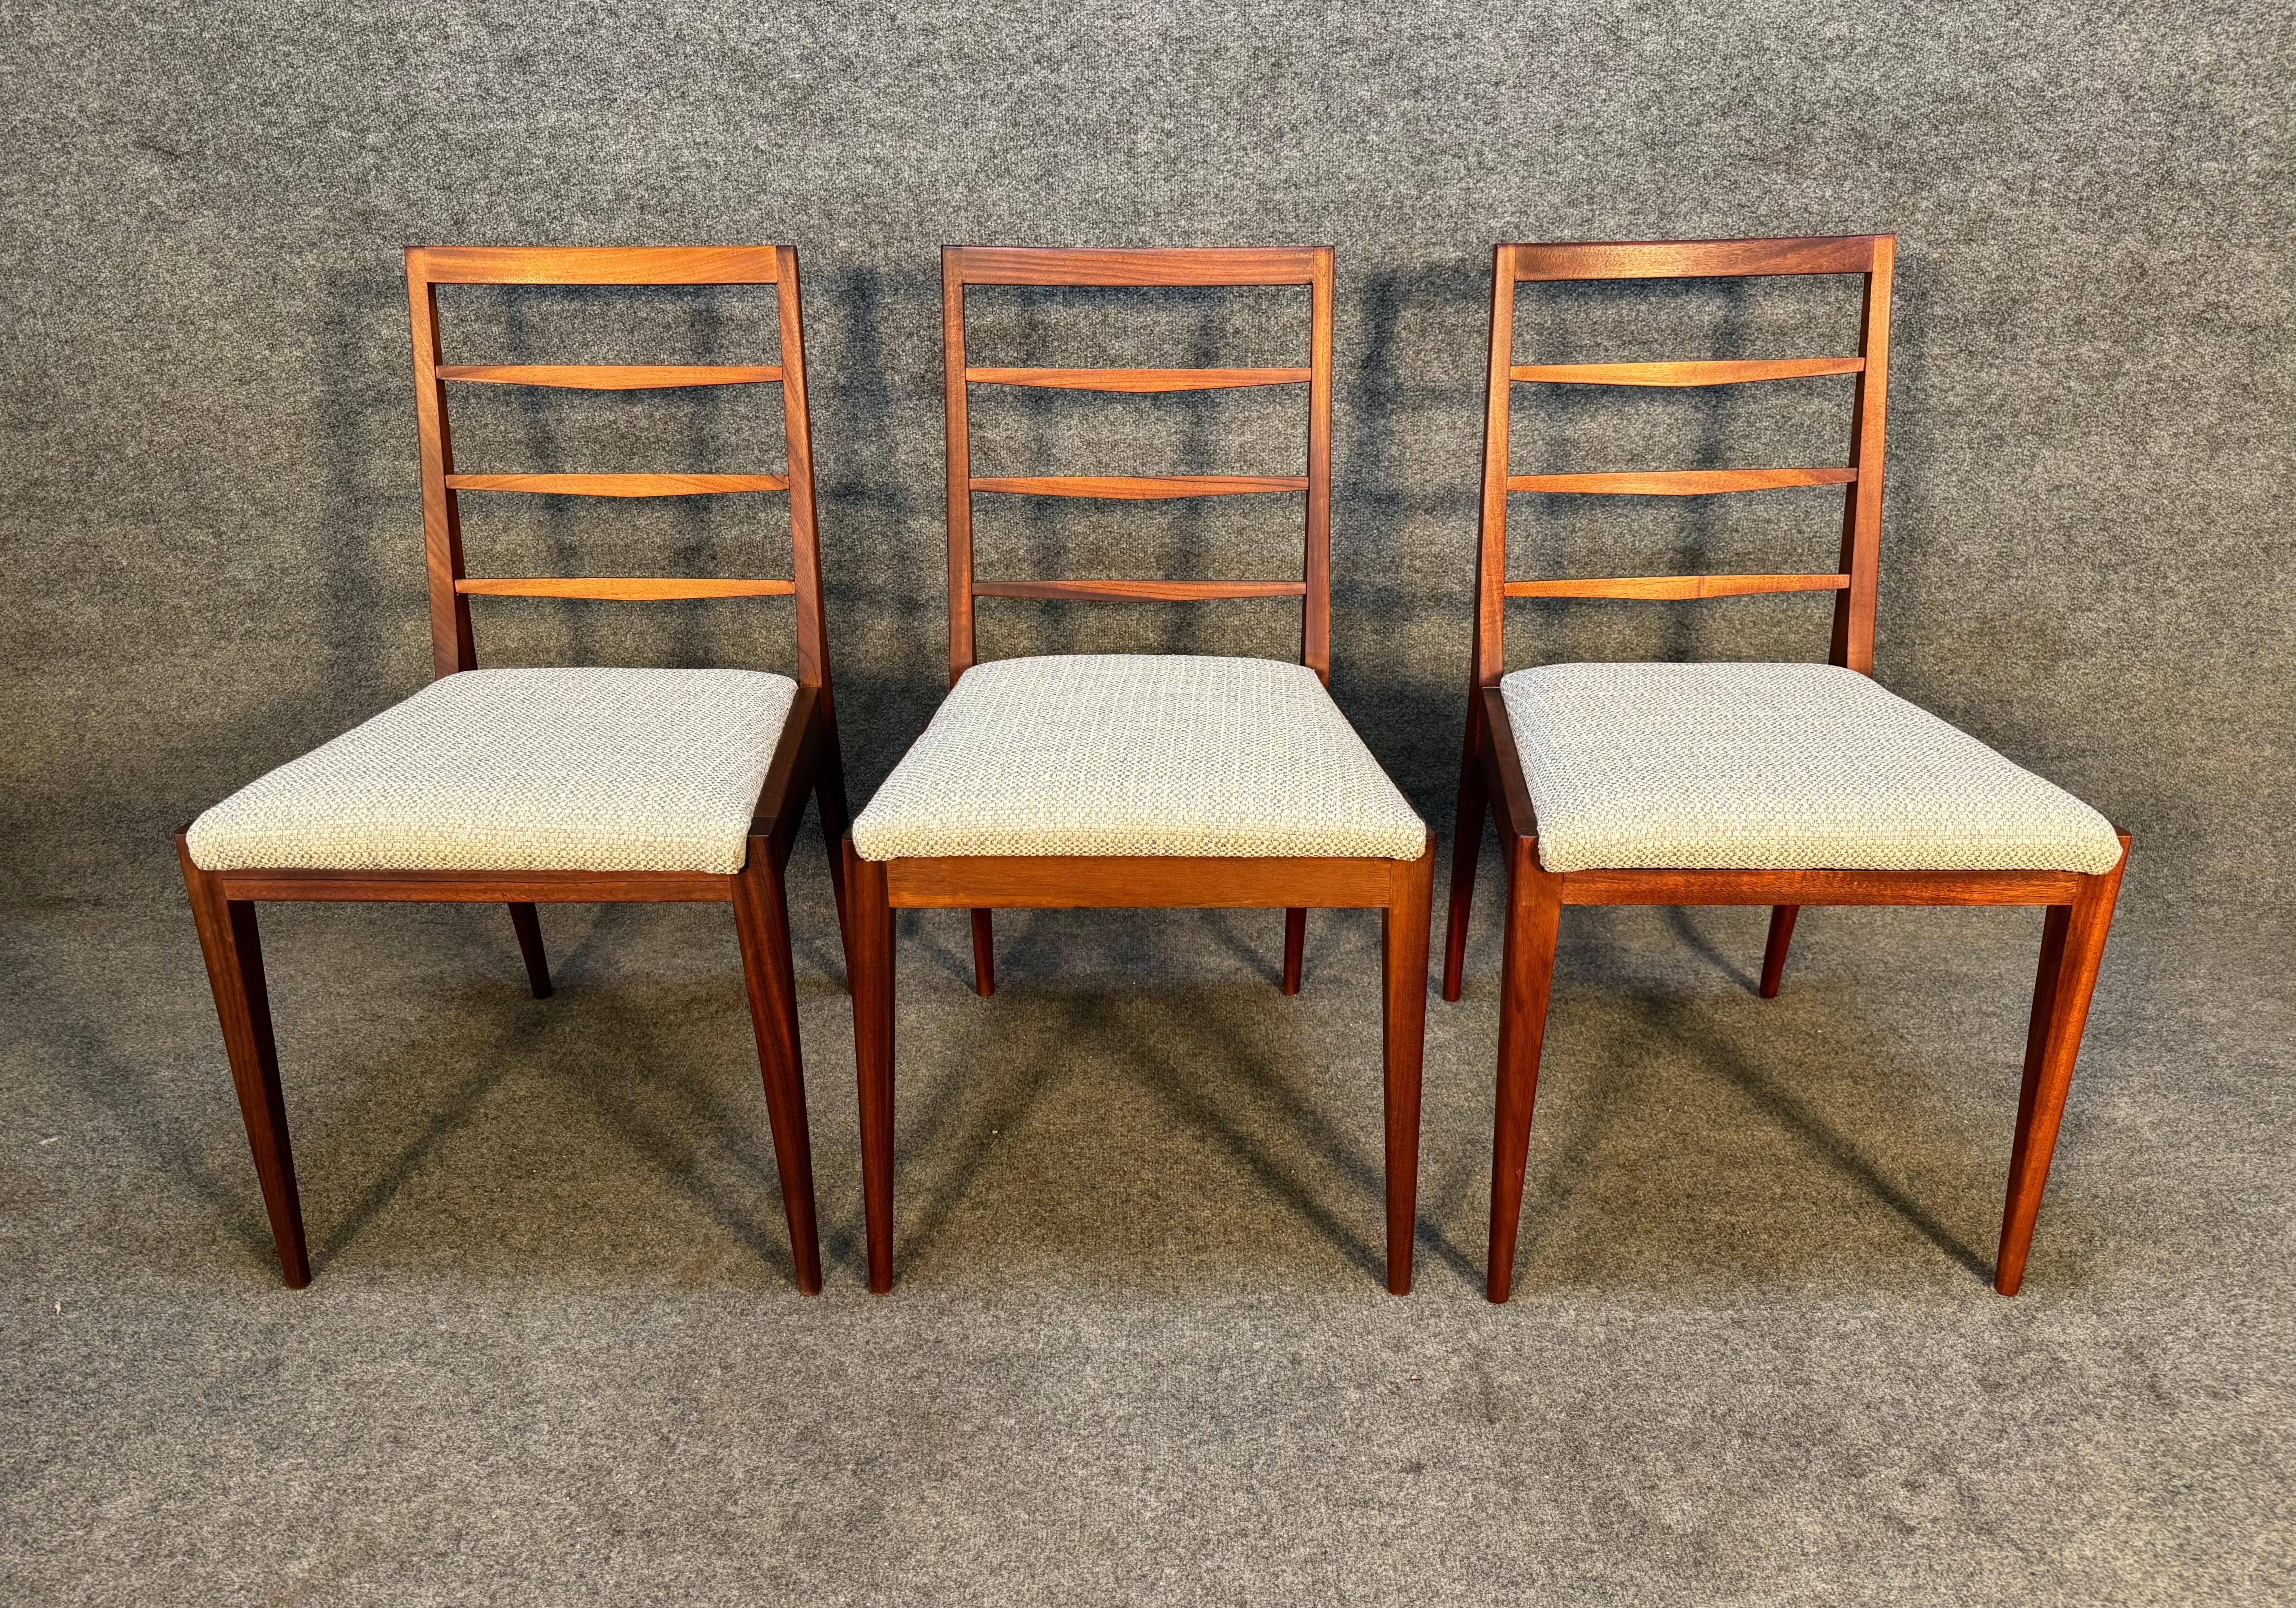 Here is a beautiful mid century modern set of six dining chairs in solid mahogany manufactured by McIntosh in Scotland in the 1960's.
This comfortable set, recently imported from Europe to California before its refinishing, features a sculptural